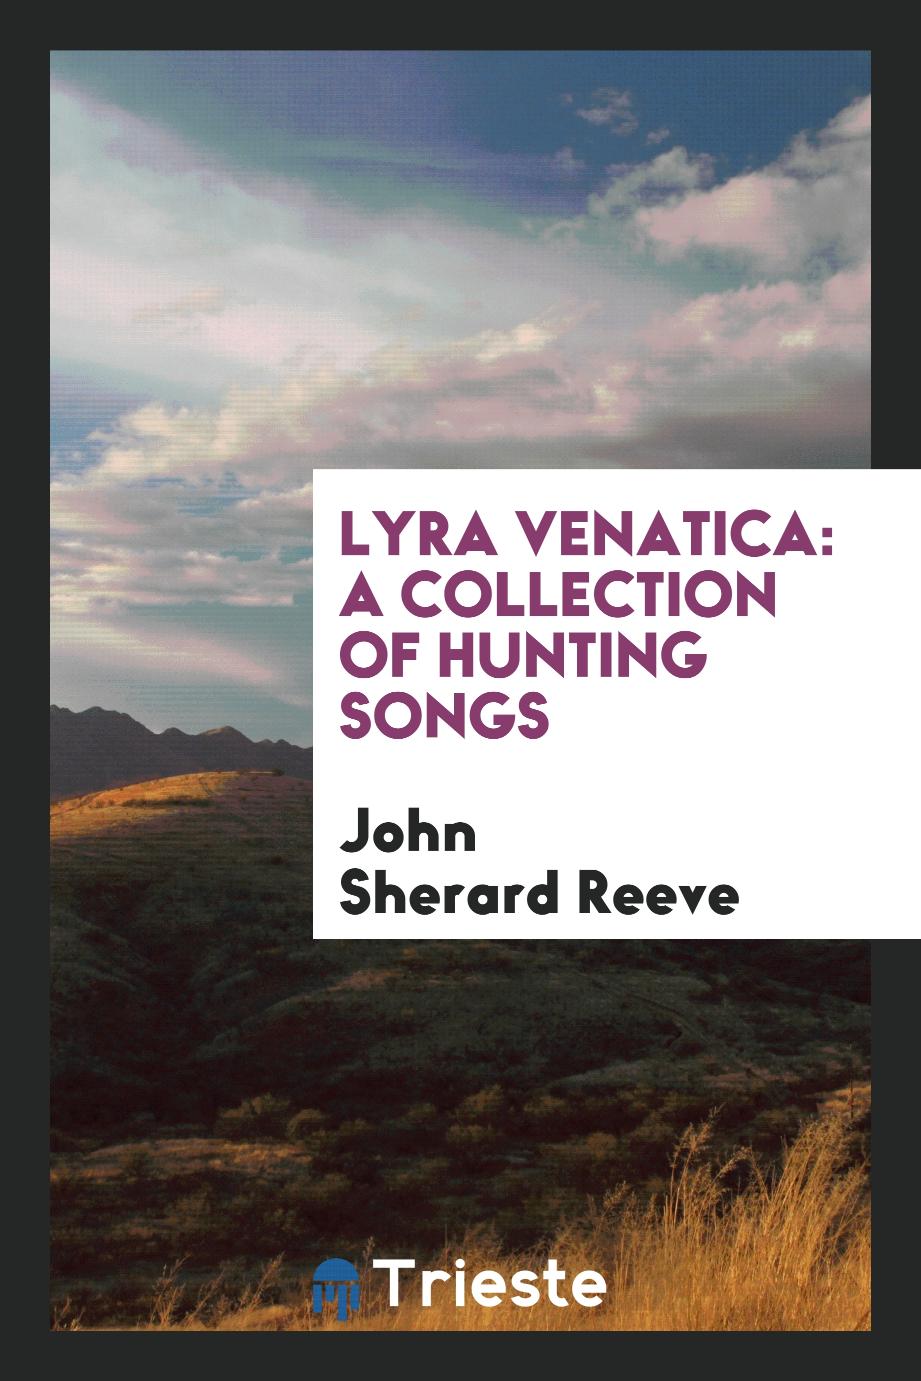 Lyra Venatica: A Collection of Hunting Songs